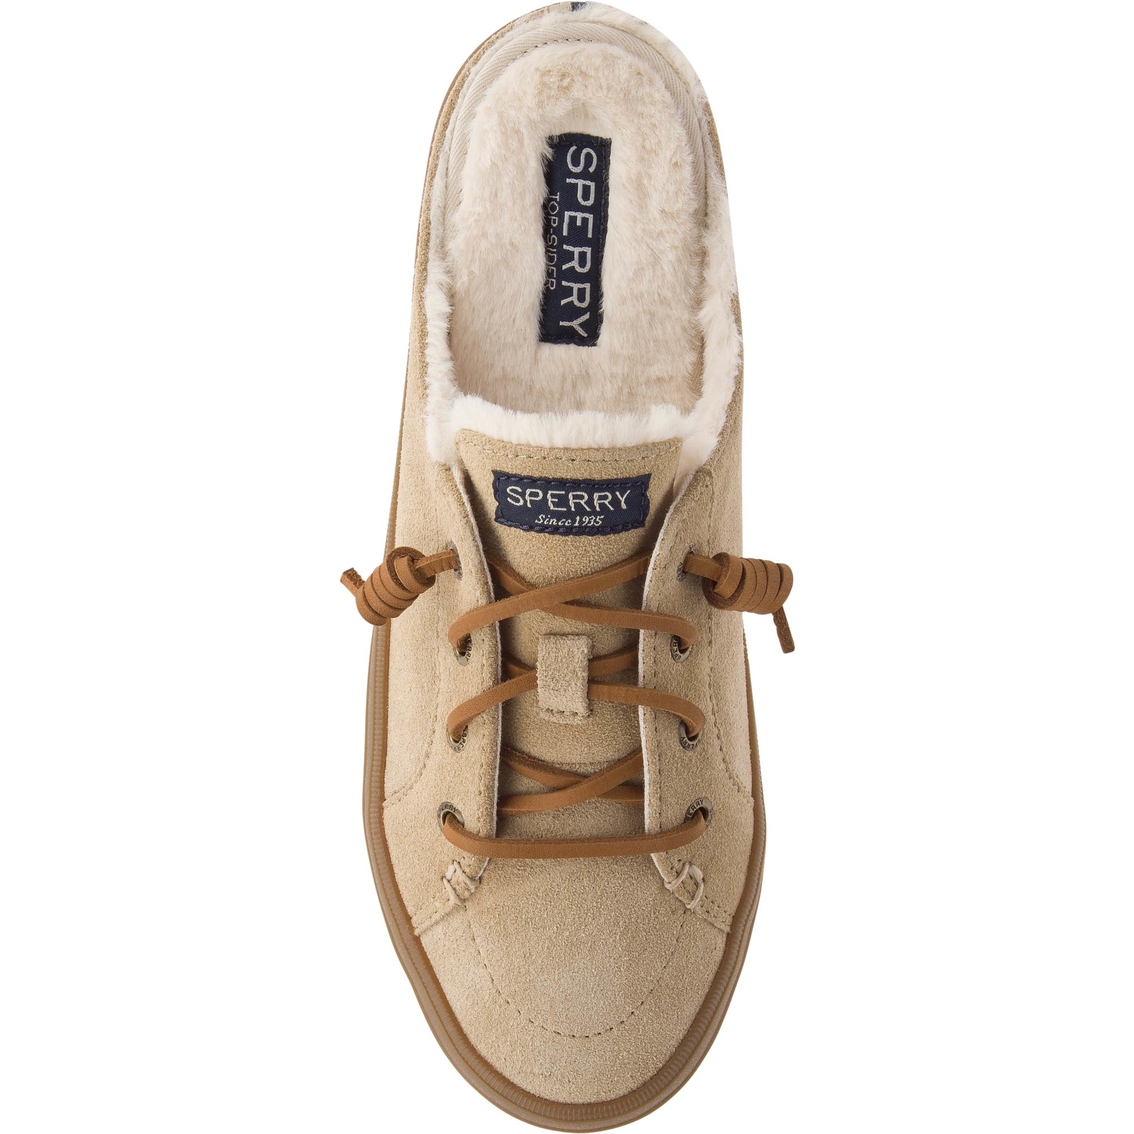 Sperry Women's Crest Vibe Suede Mule Sneakers - Image 5 of 6